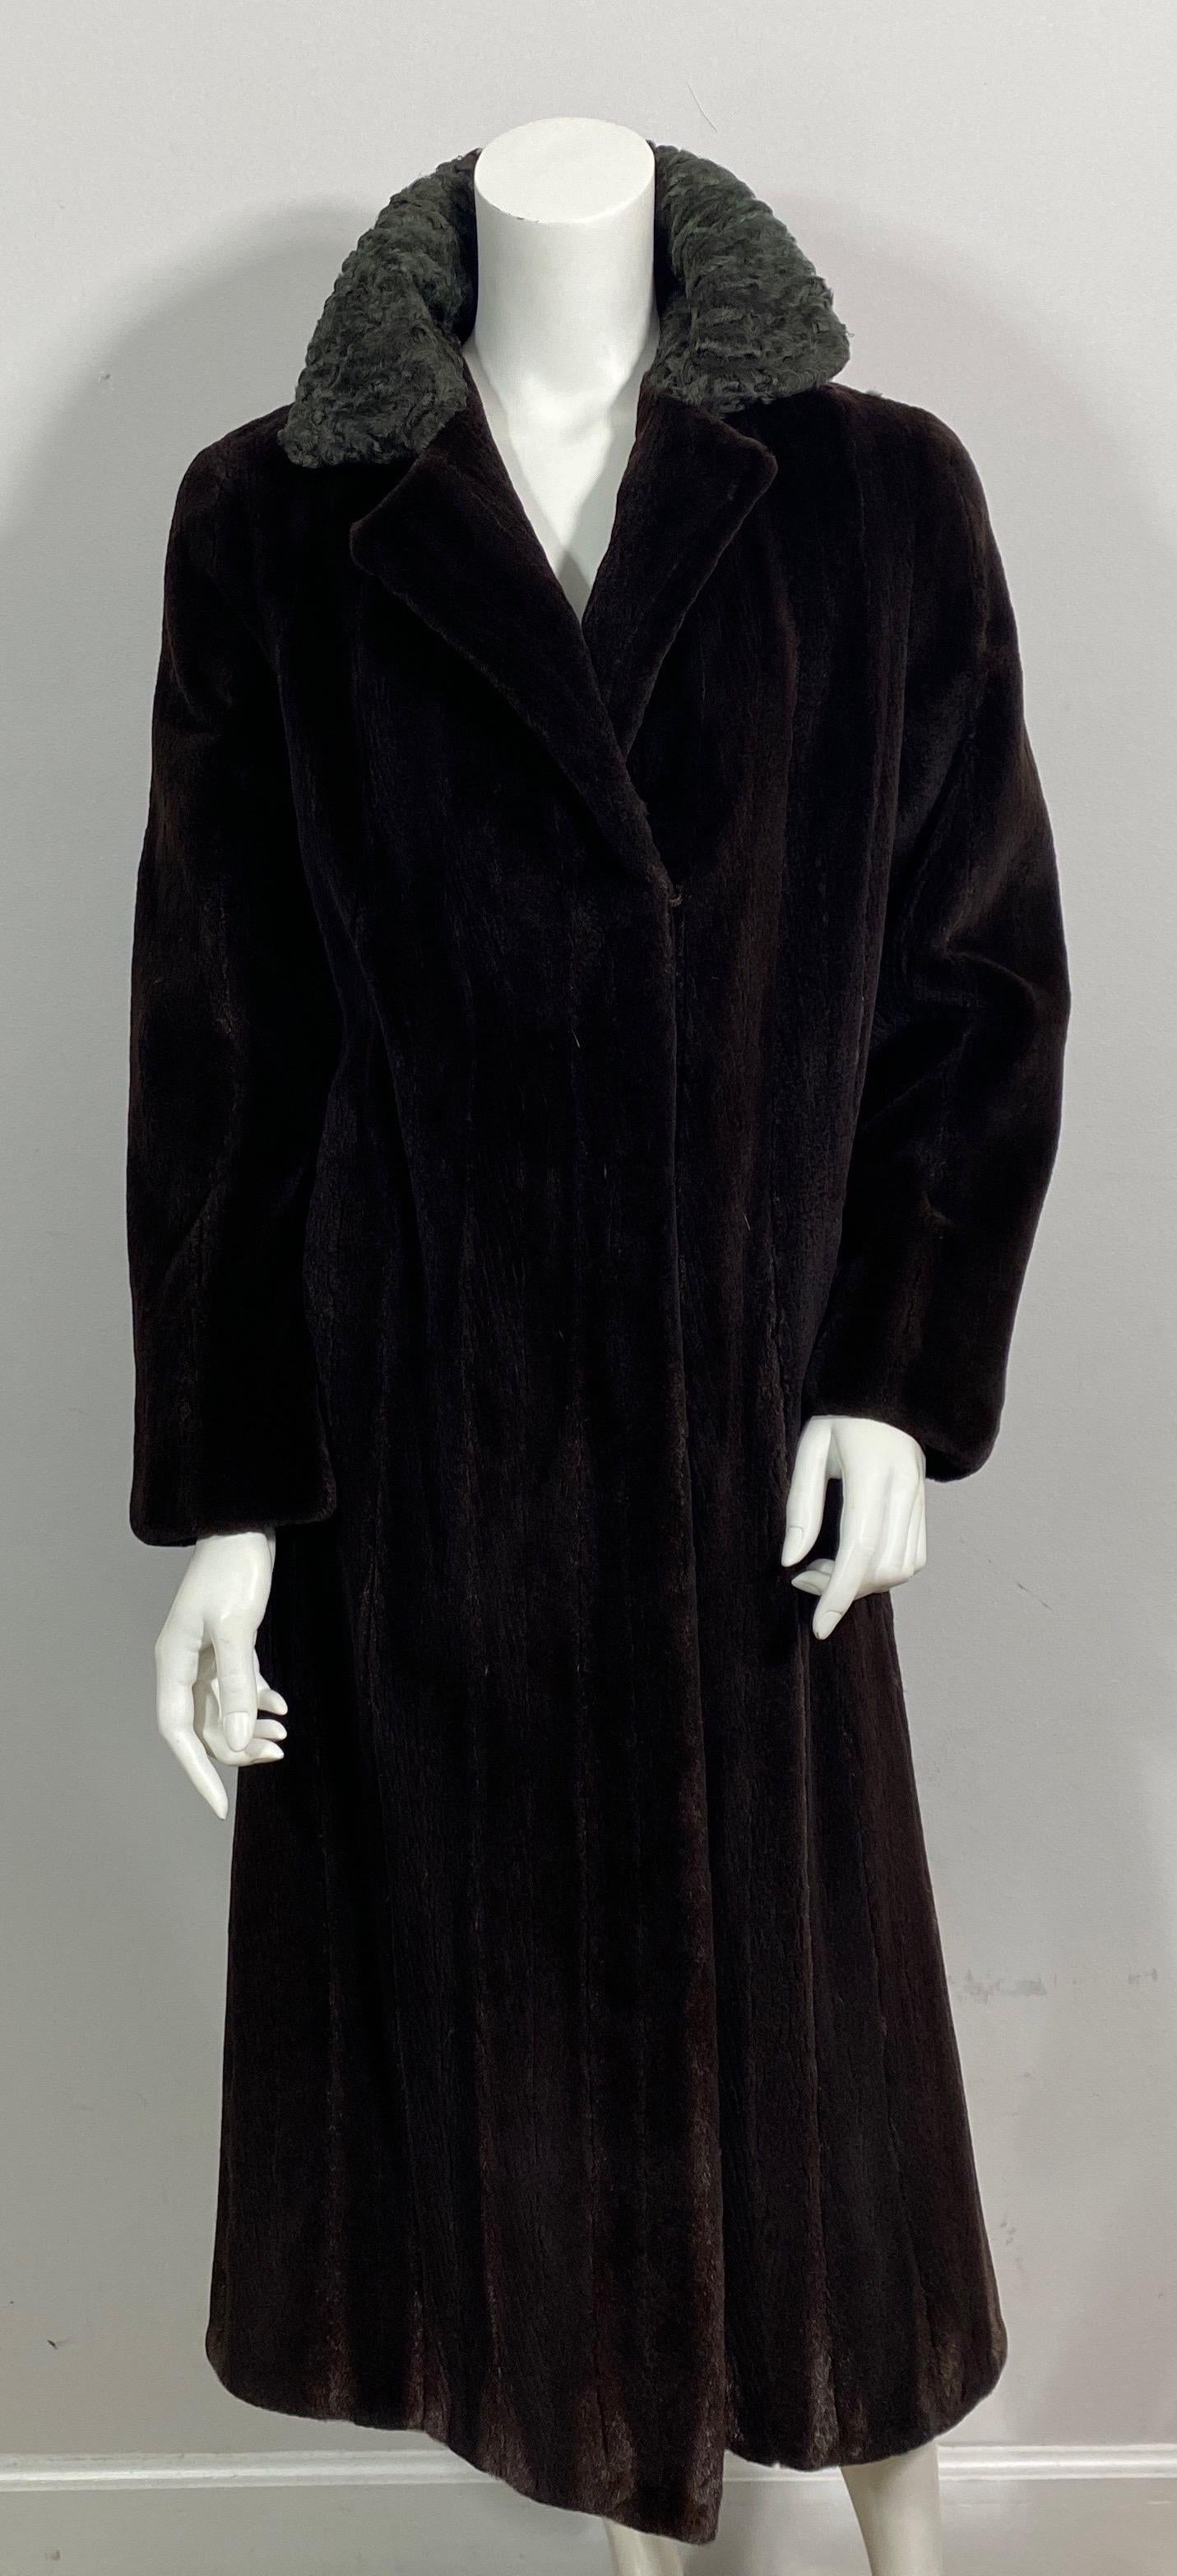 Neiman Marcus Chocolate Brown Sheared Beaver Long Coat - Size Medium This beautiful rich chocolate brown sheared beaver long coat has a lighter brown Persian lamb 4” collar which can be worn down or up along the back. The coat has 1 top exterior